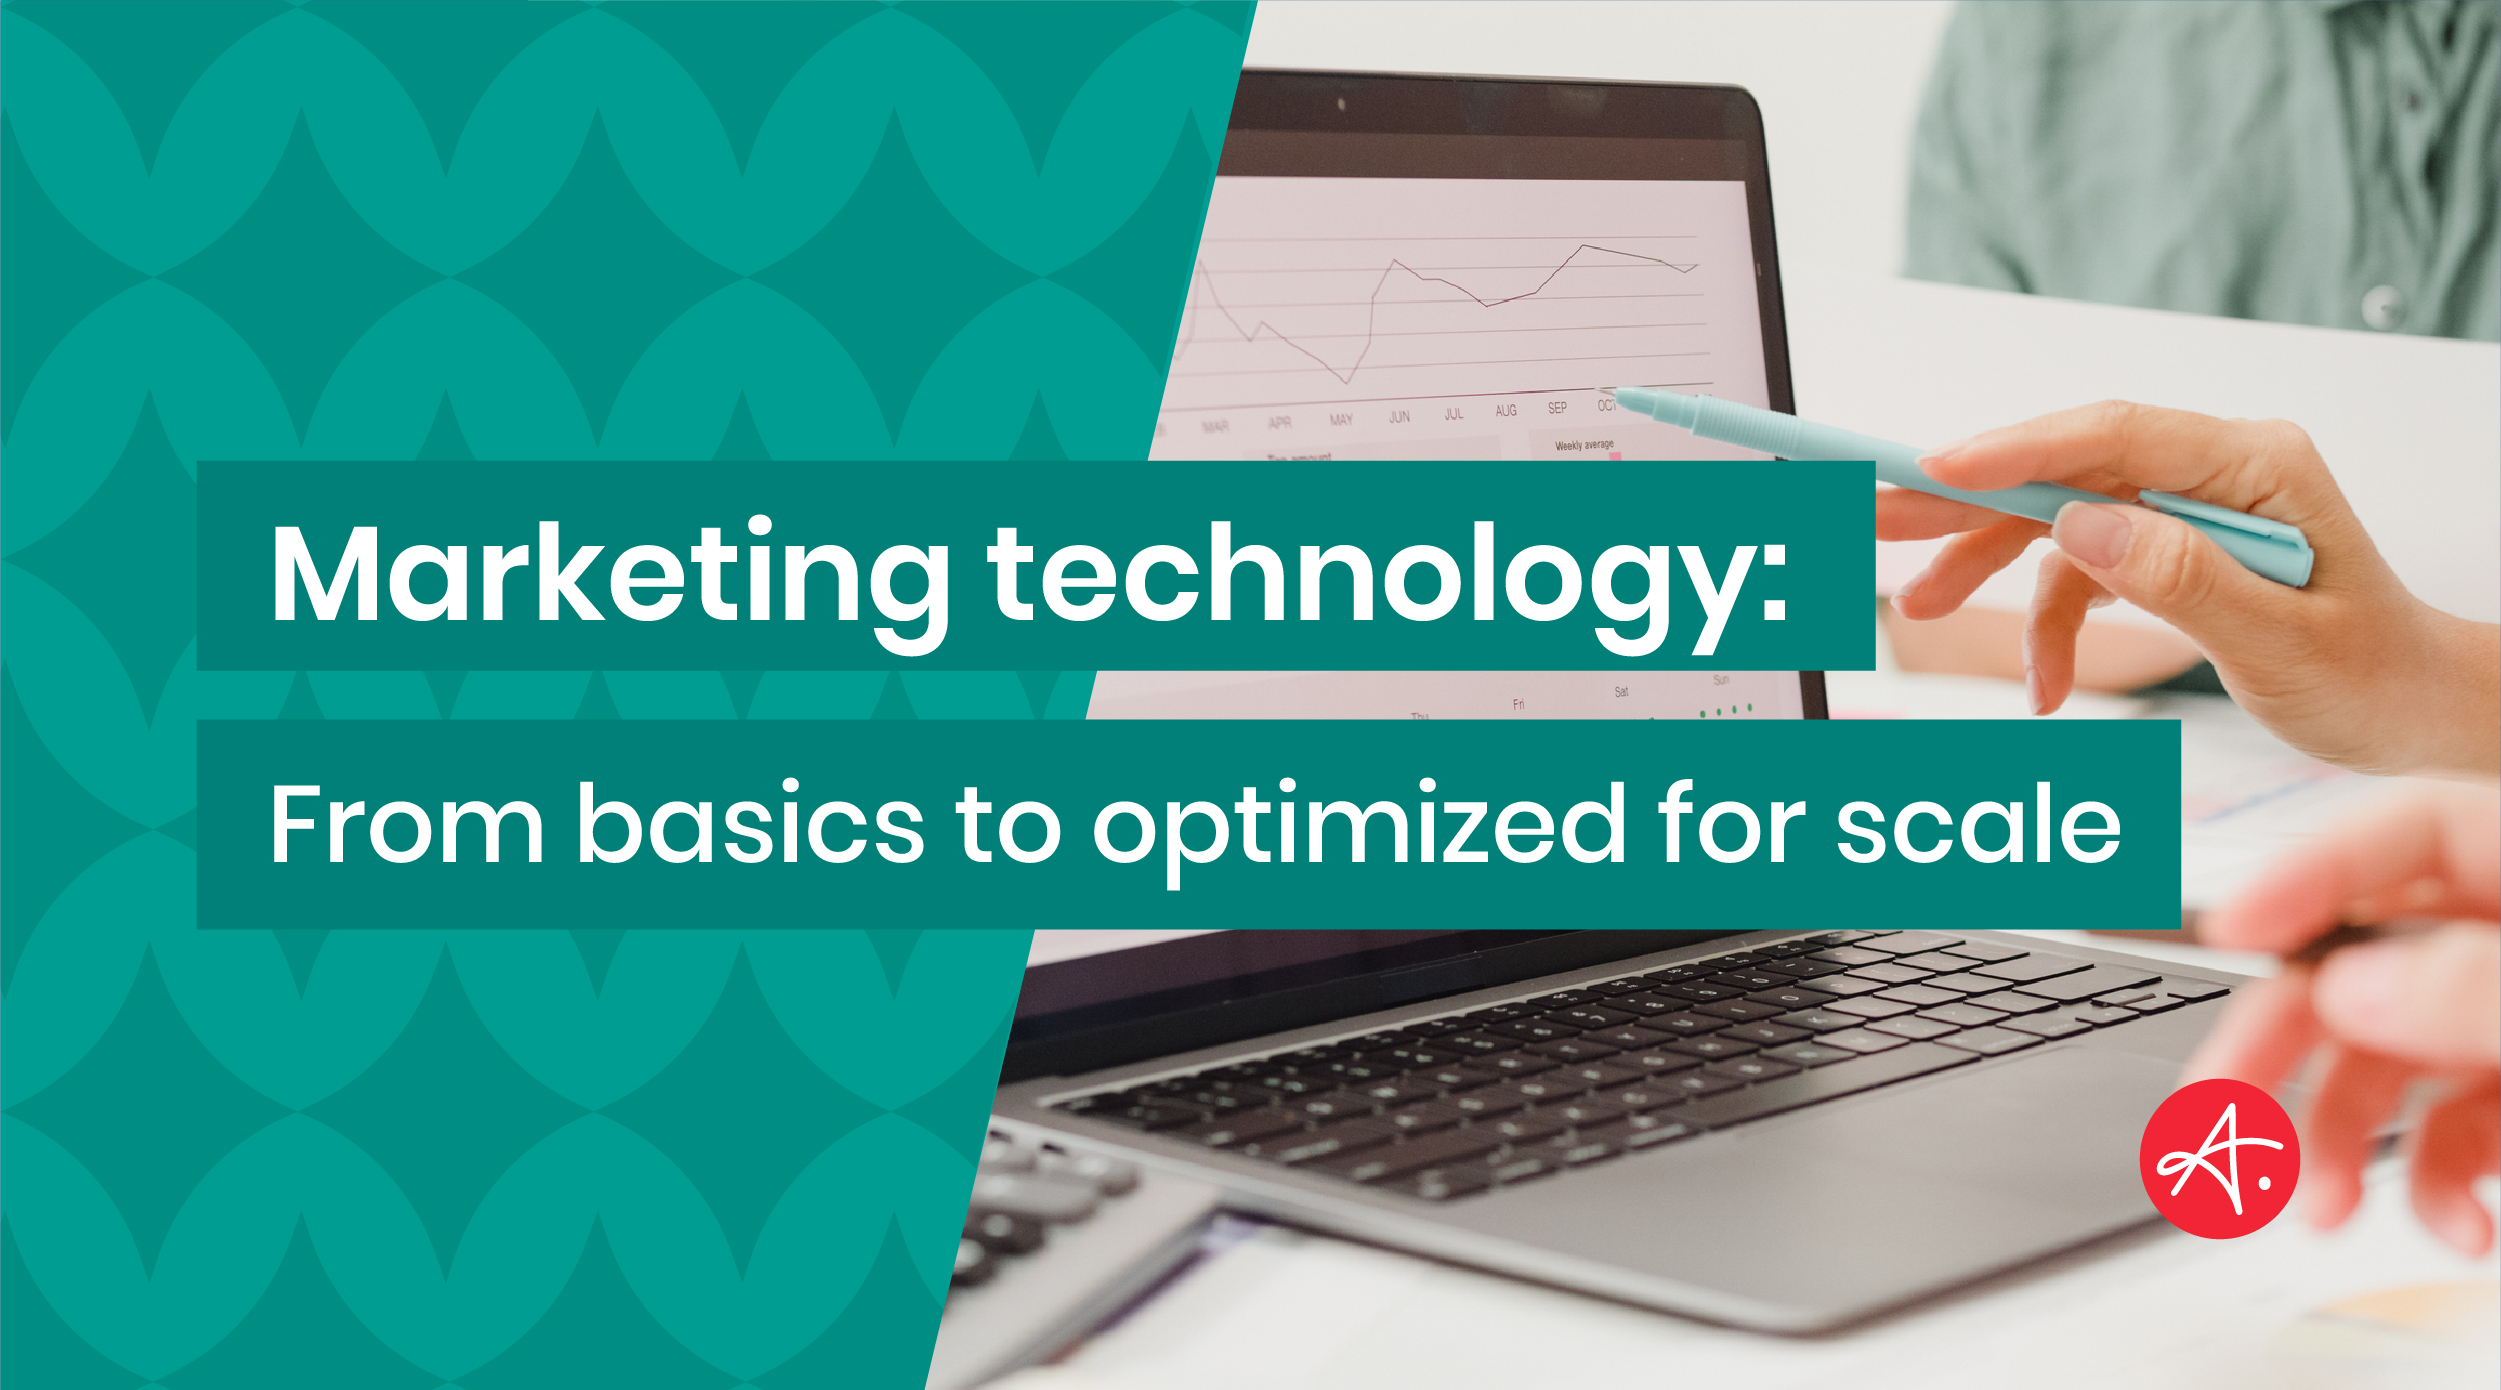 Marketing technology: From basics to optimized for scale